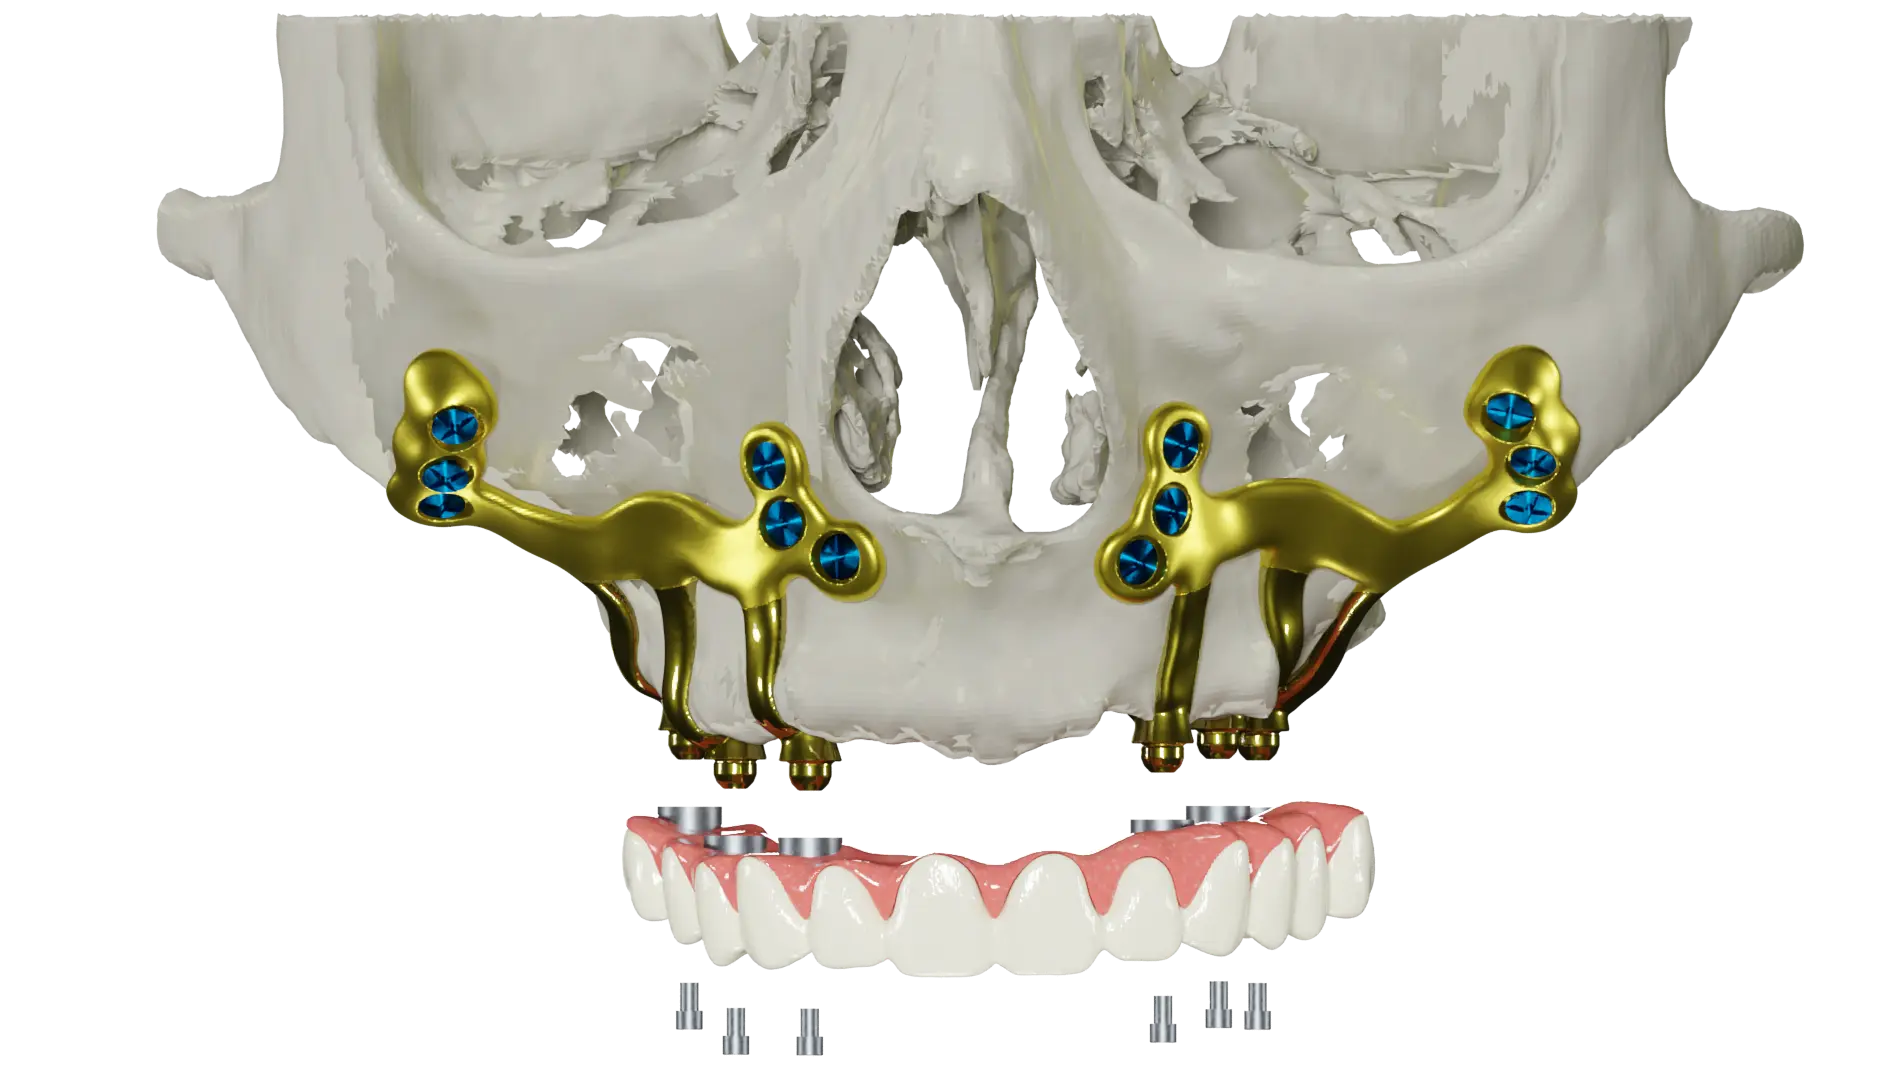 subperiosteal-dental-implants for upper jaw